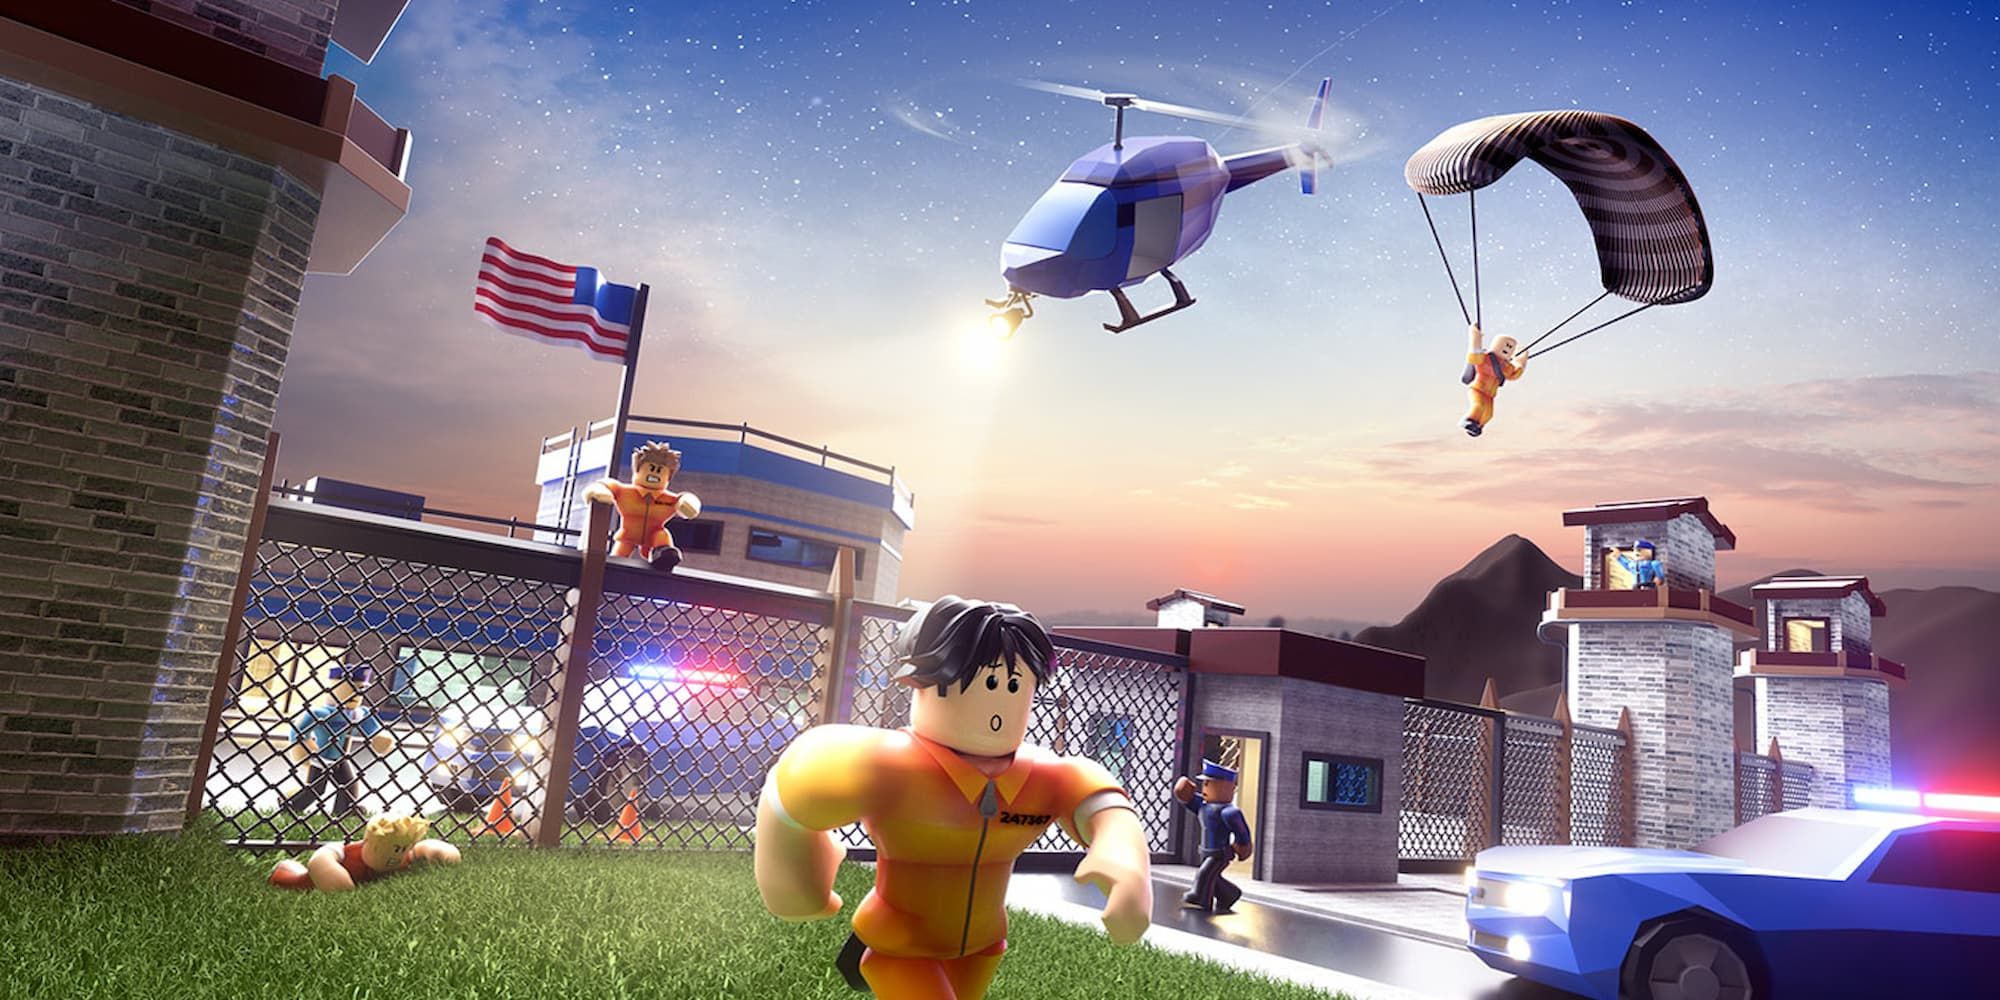 A prisoner breaks out in Jailbreak, one of Roblox's most popular games.